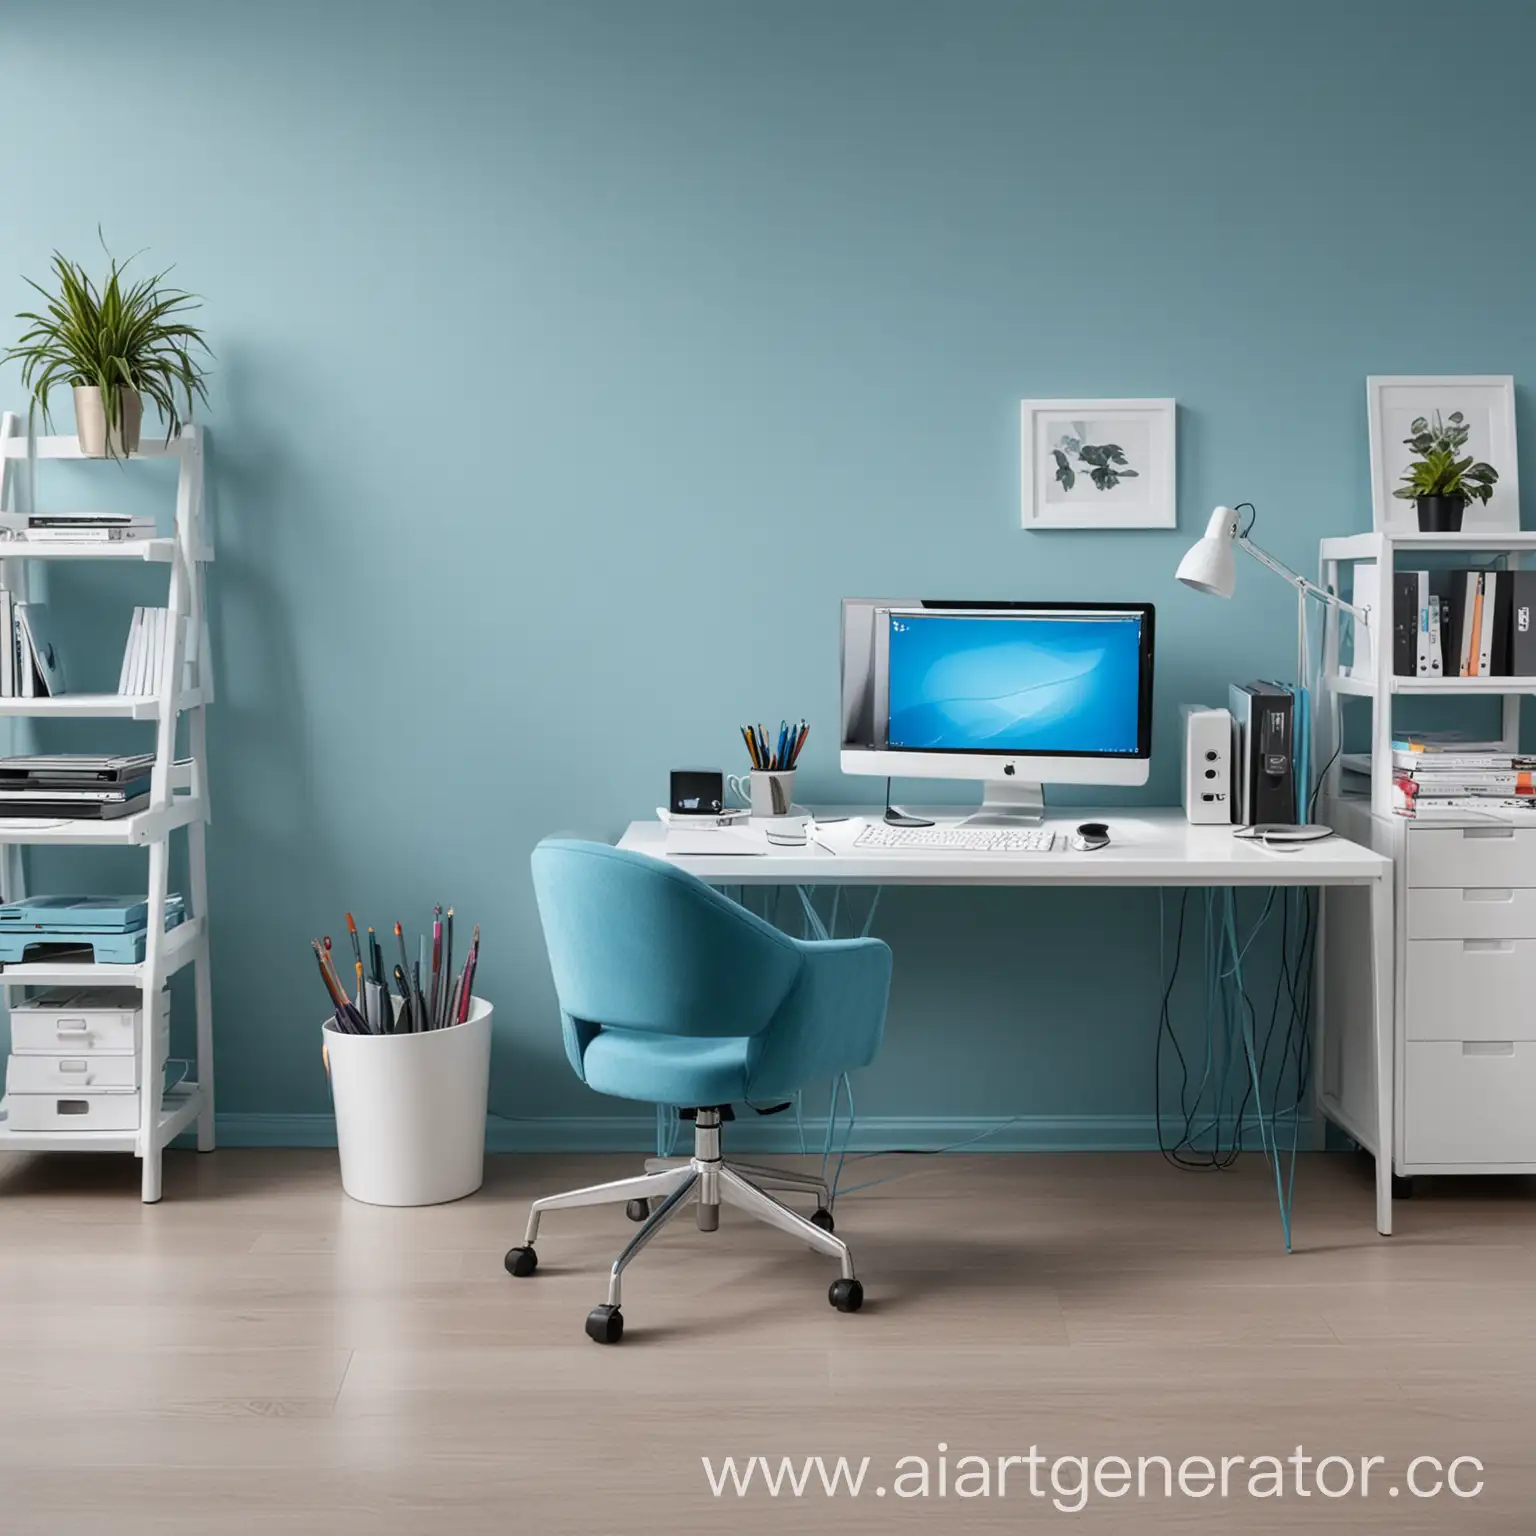 Stylish-Office-Scene-with-Blue-Tones-and-Computer-Equipment